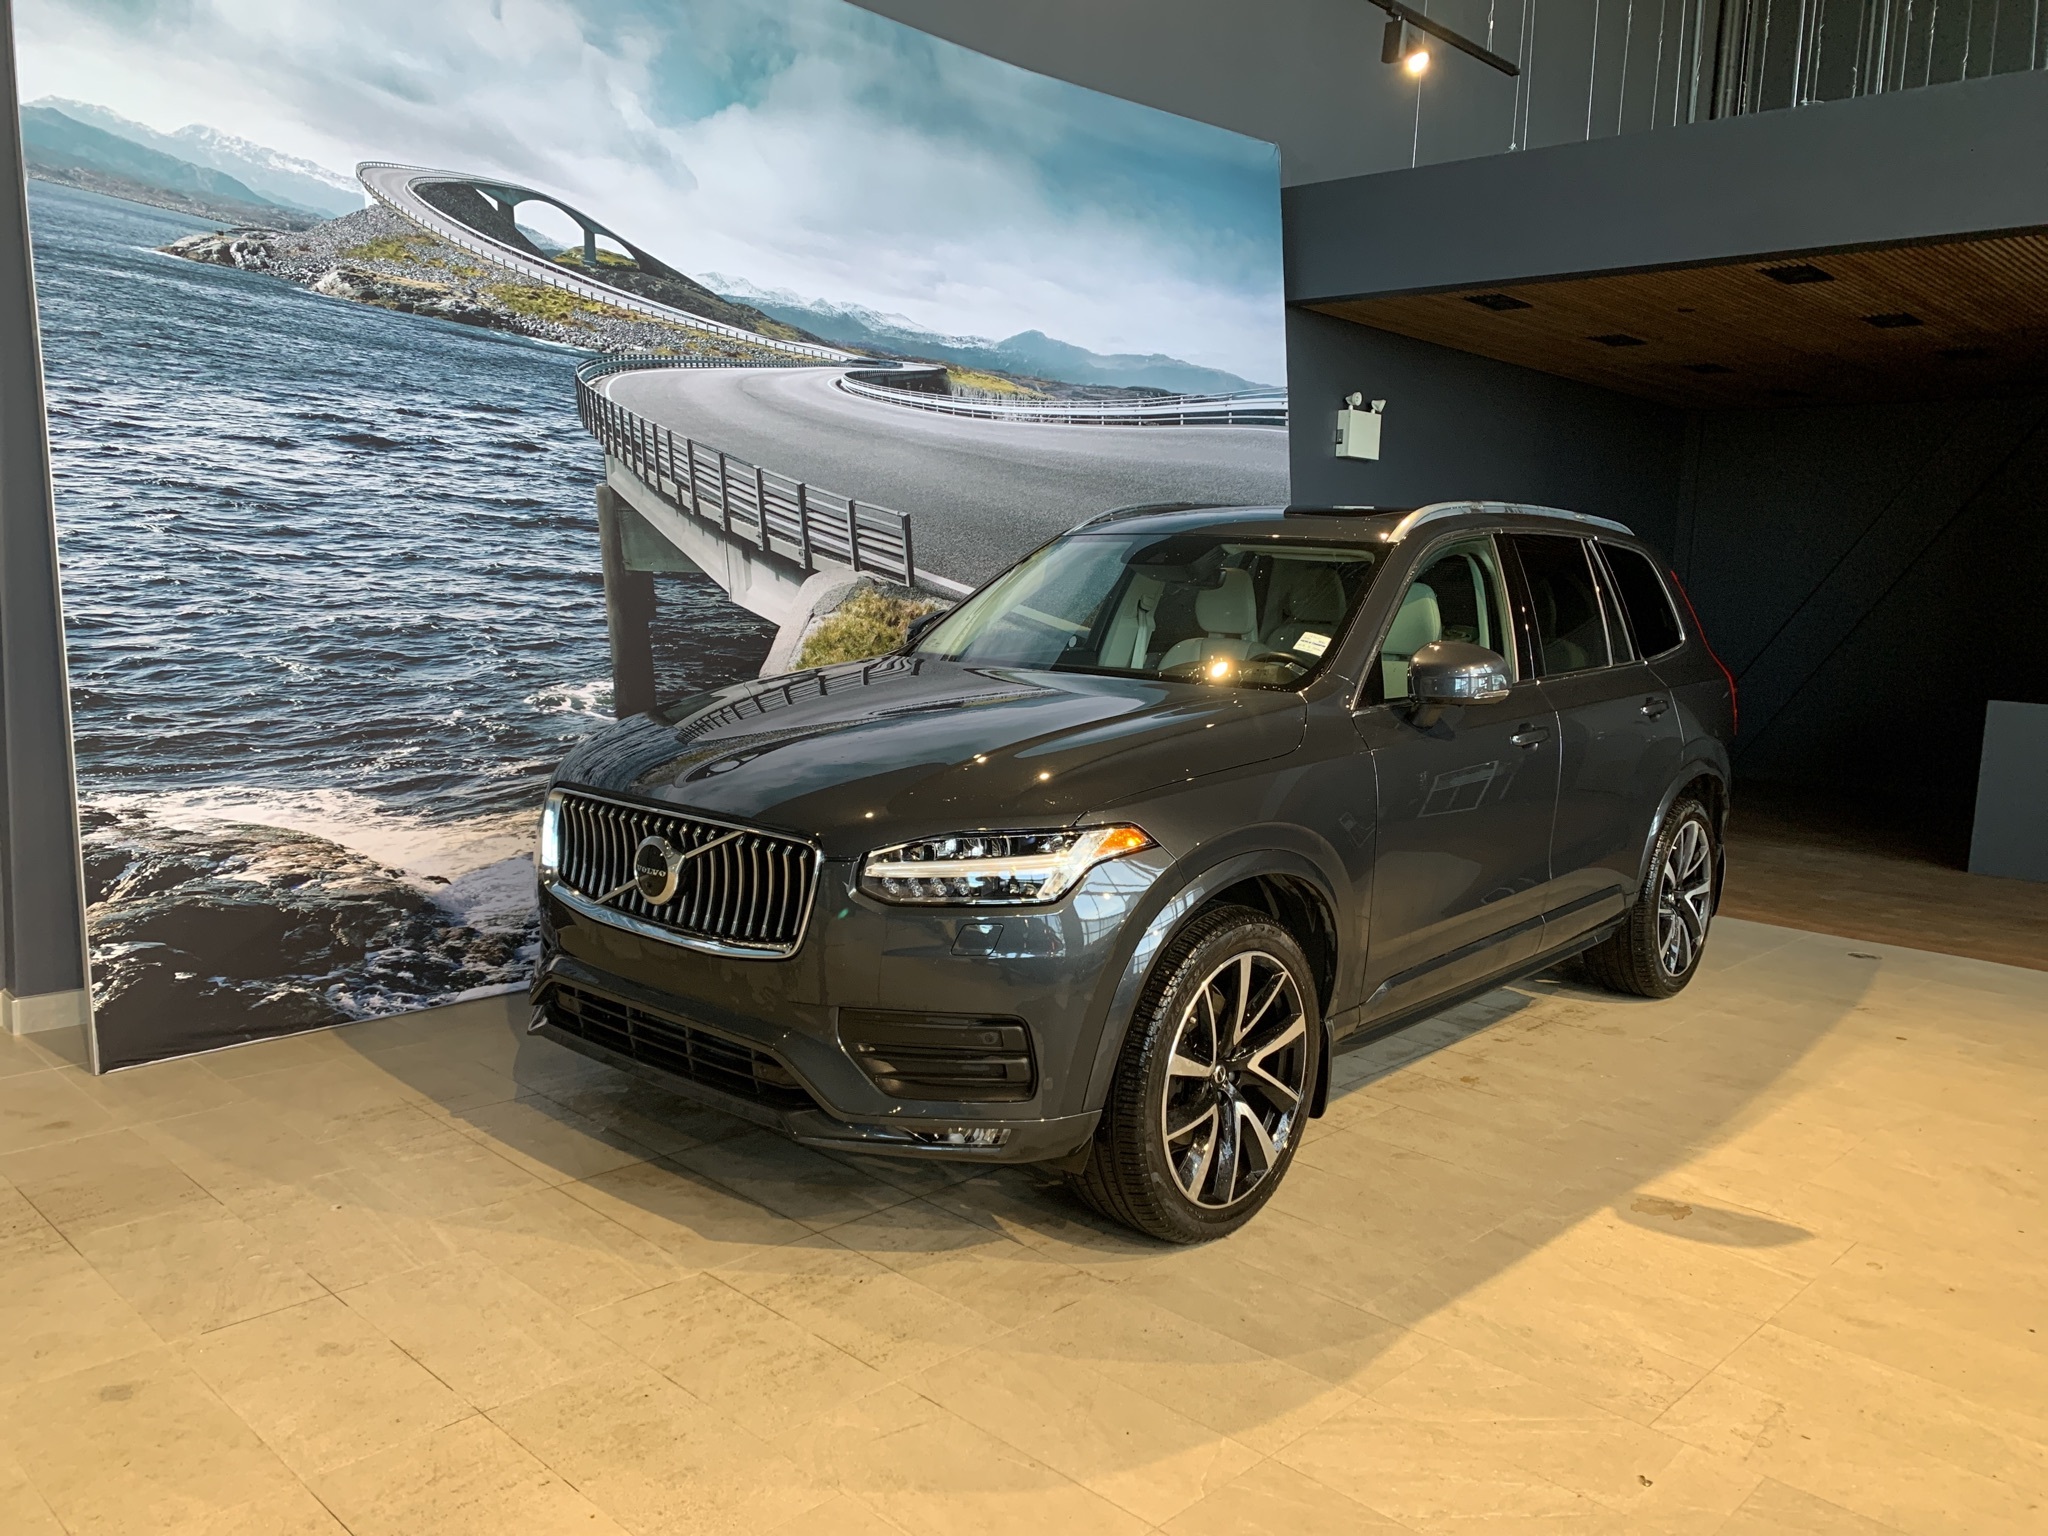 2020 Volvo XC90 T6 AWD Momentum (7-Seat) FROM 3.99%